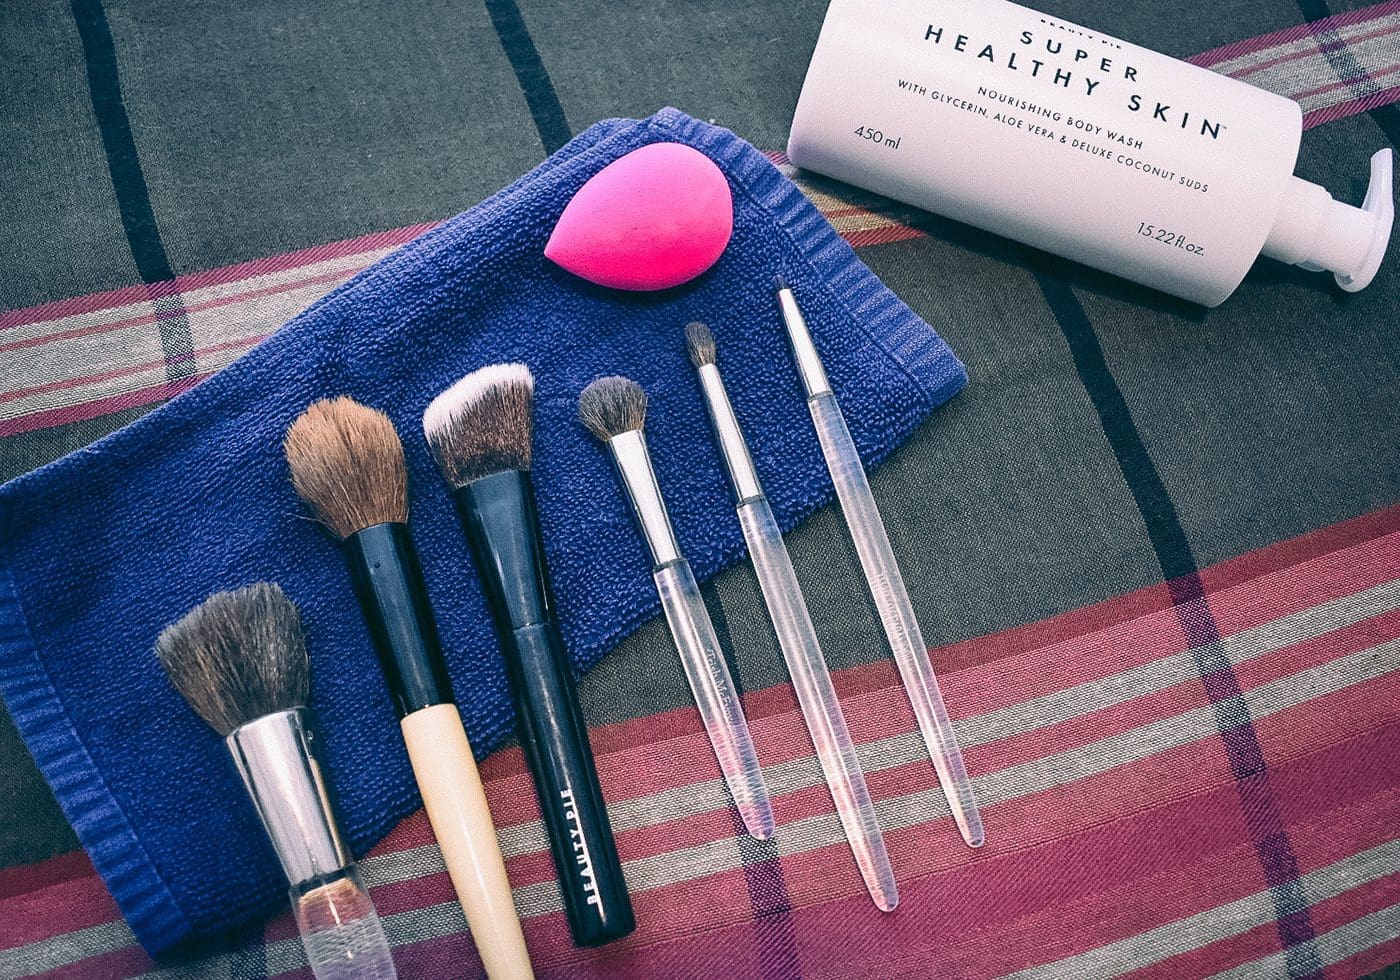 Cleaning makeup brushes is crucial for any beauty routine. Get step-by-step instructions on how to clean makeup brushes here!